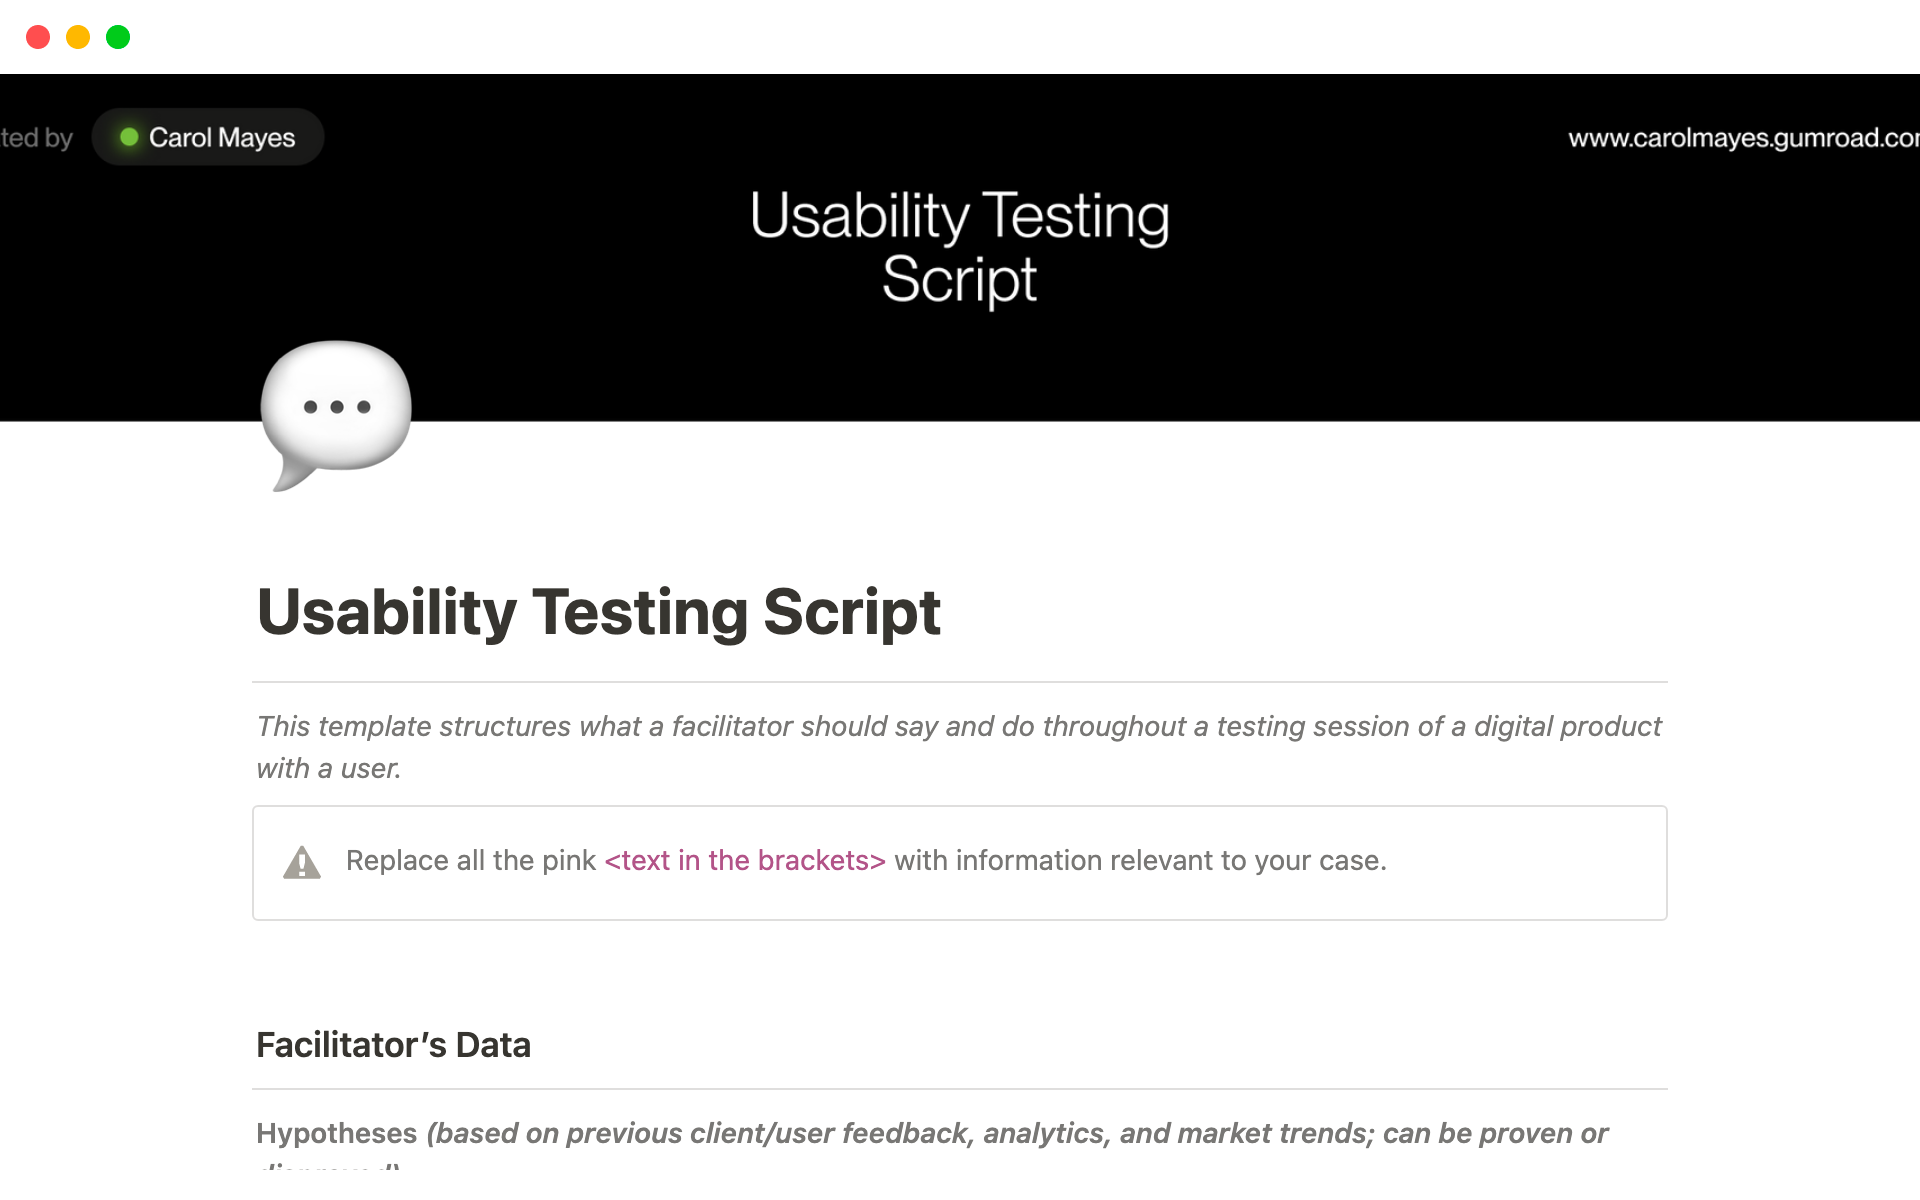 Helps Product Designers facilitate Usability Testing sessions.